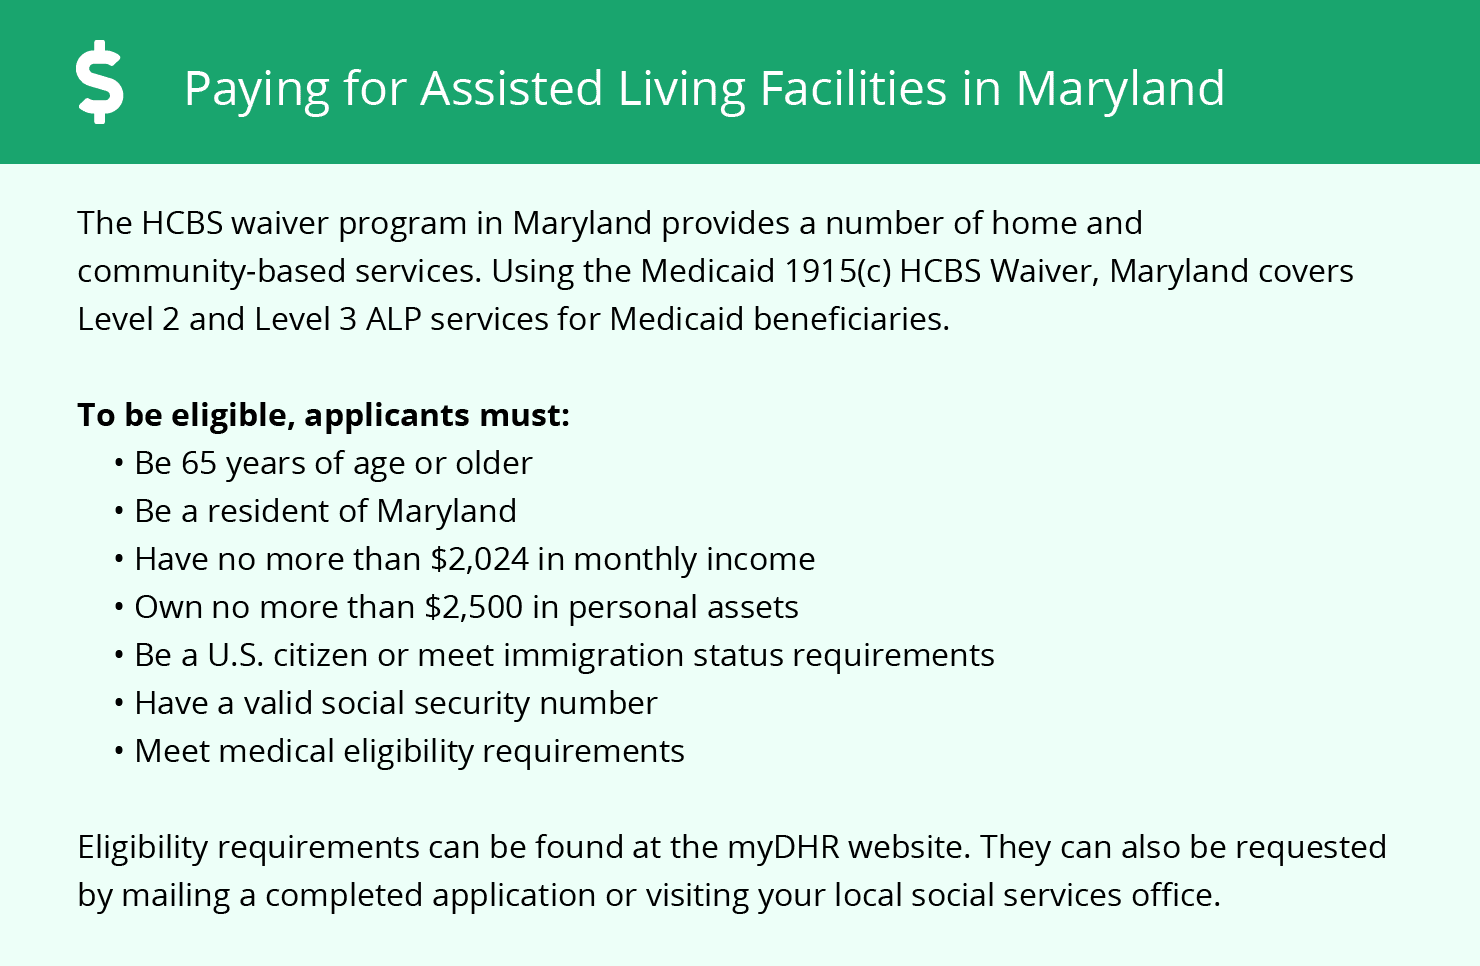 Paying for Assisted Living Facilities in Maryland